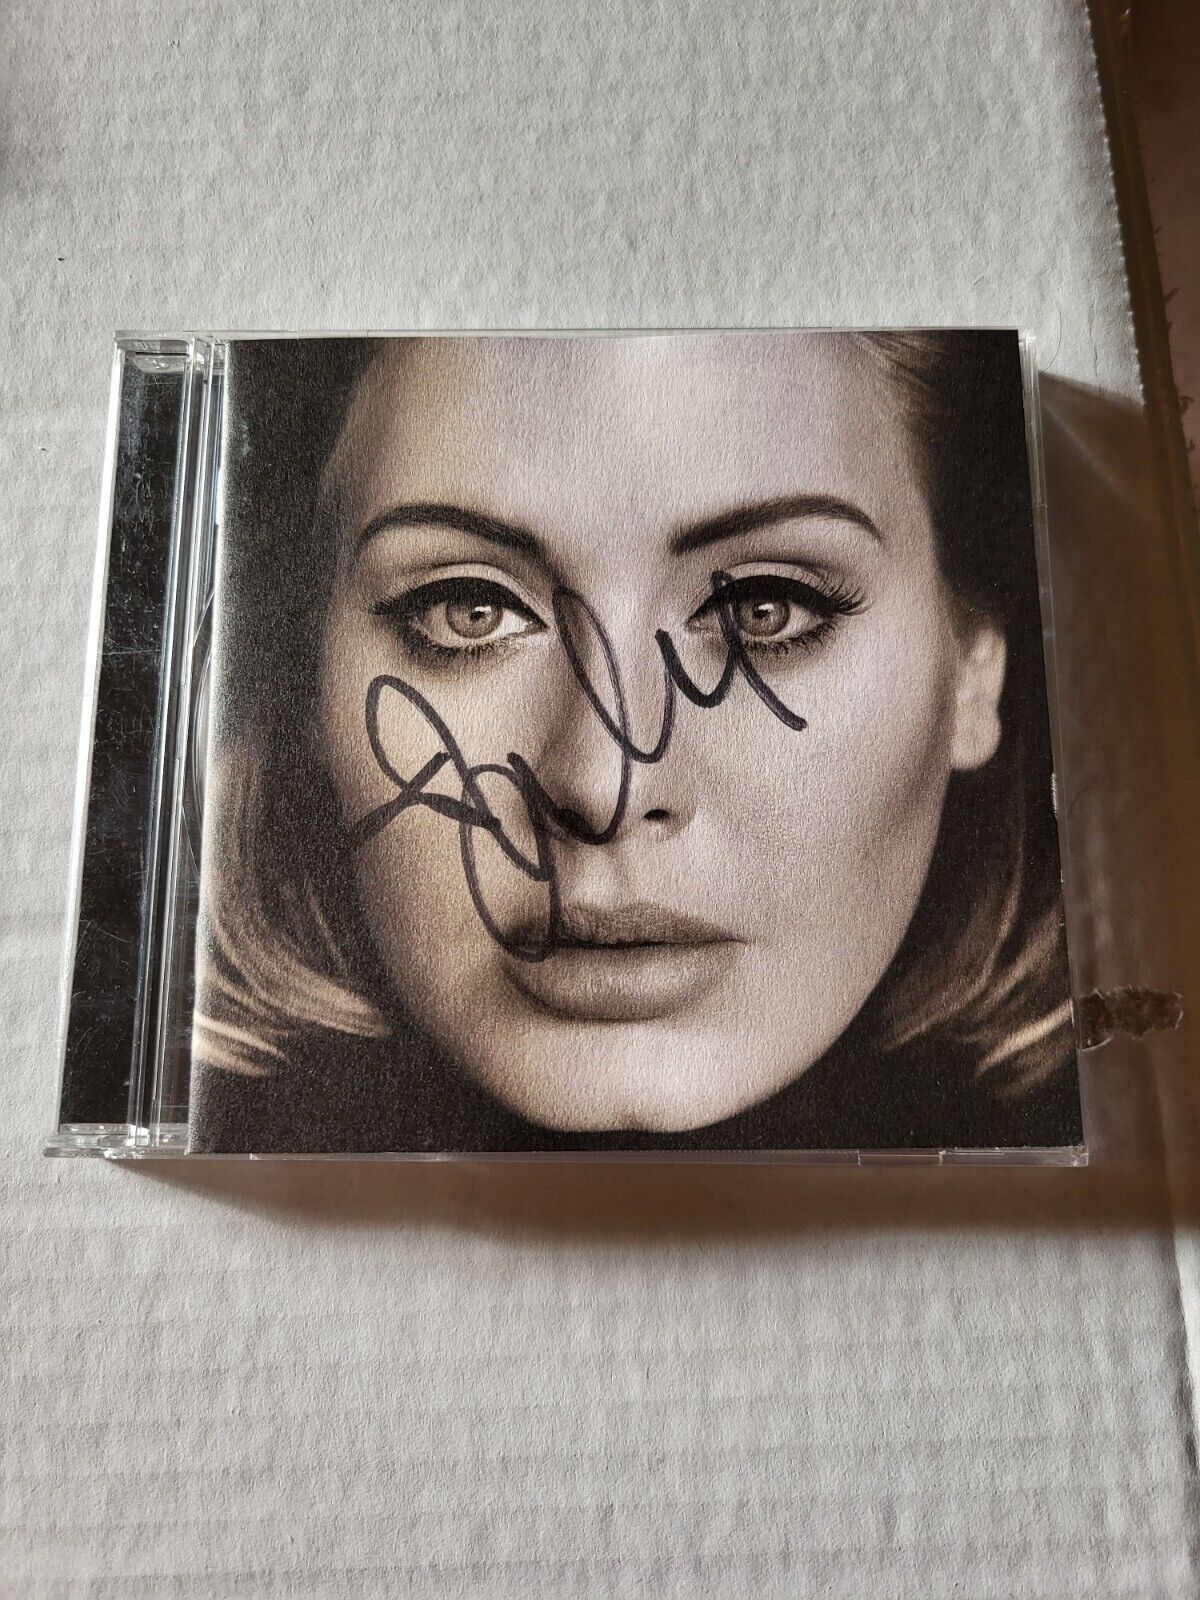 Adele Signed Autographed CD 